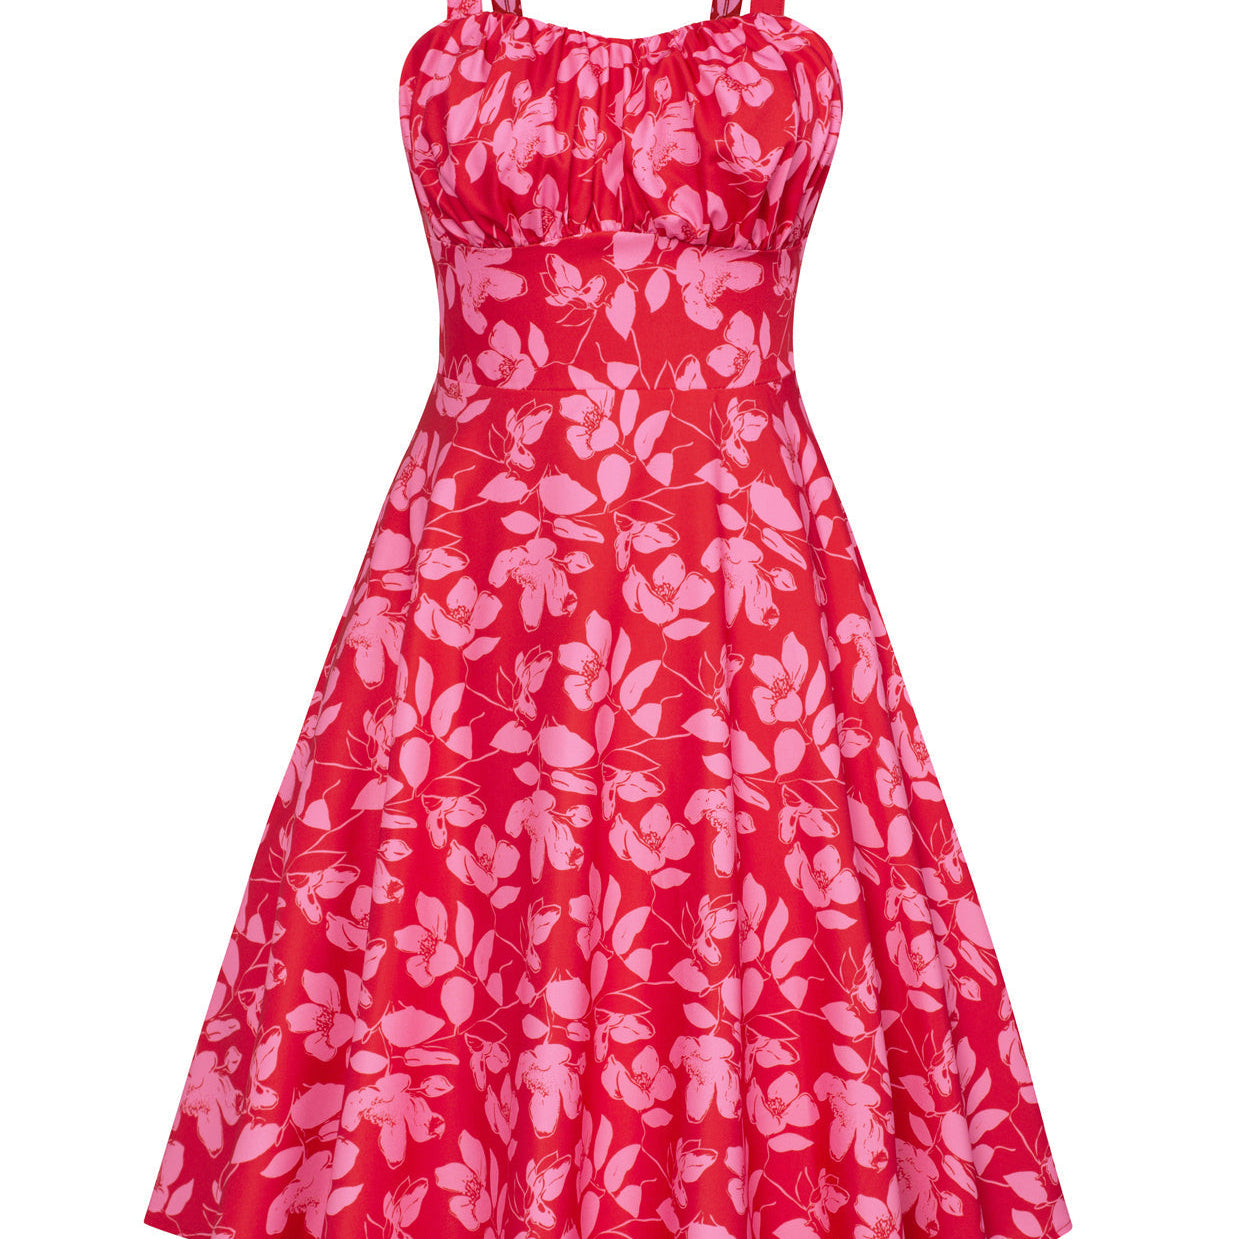 Vintage Floral Two-Way Defined Waist Dress